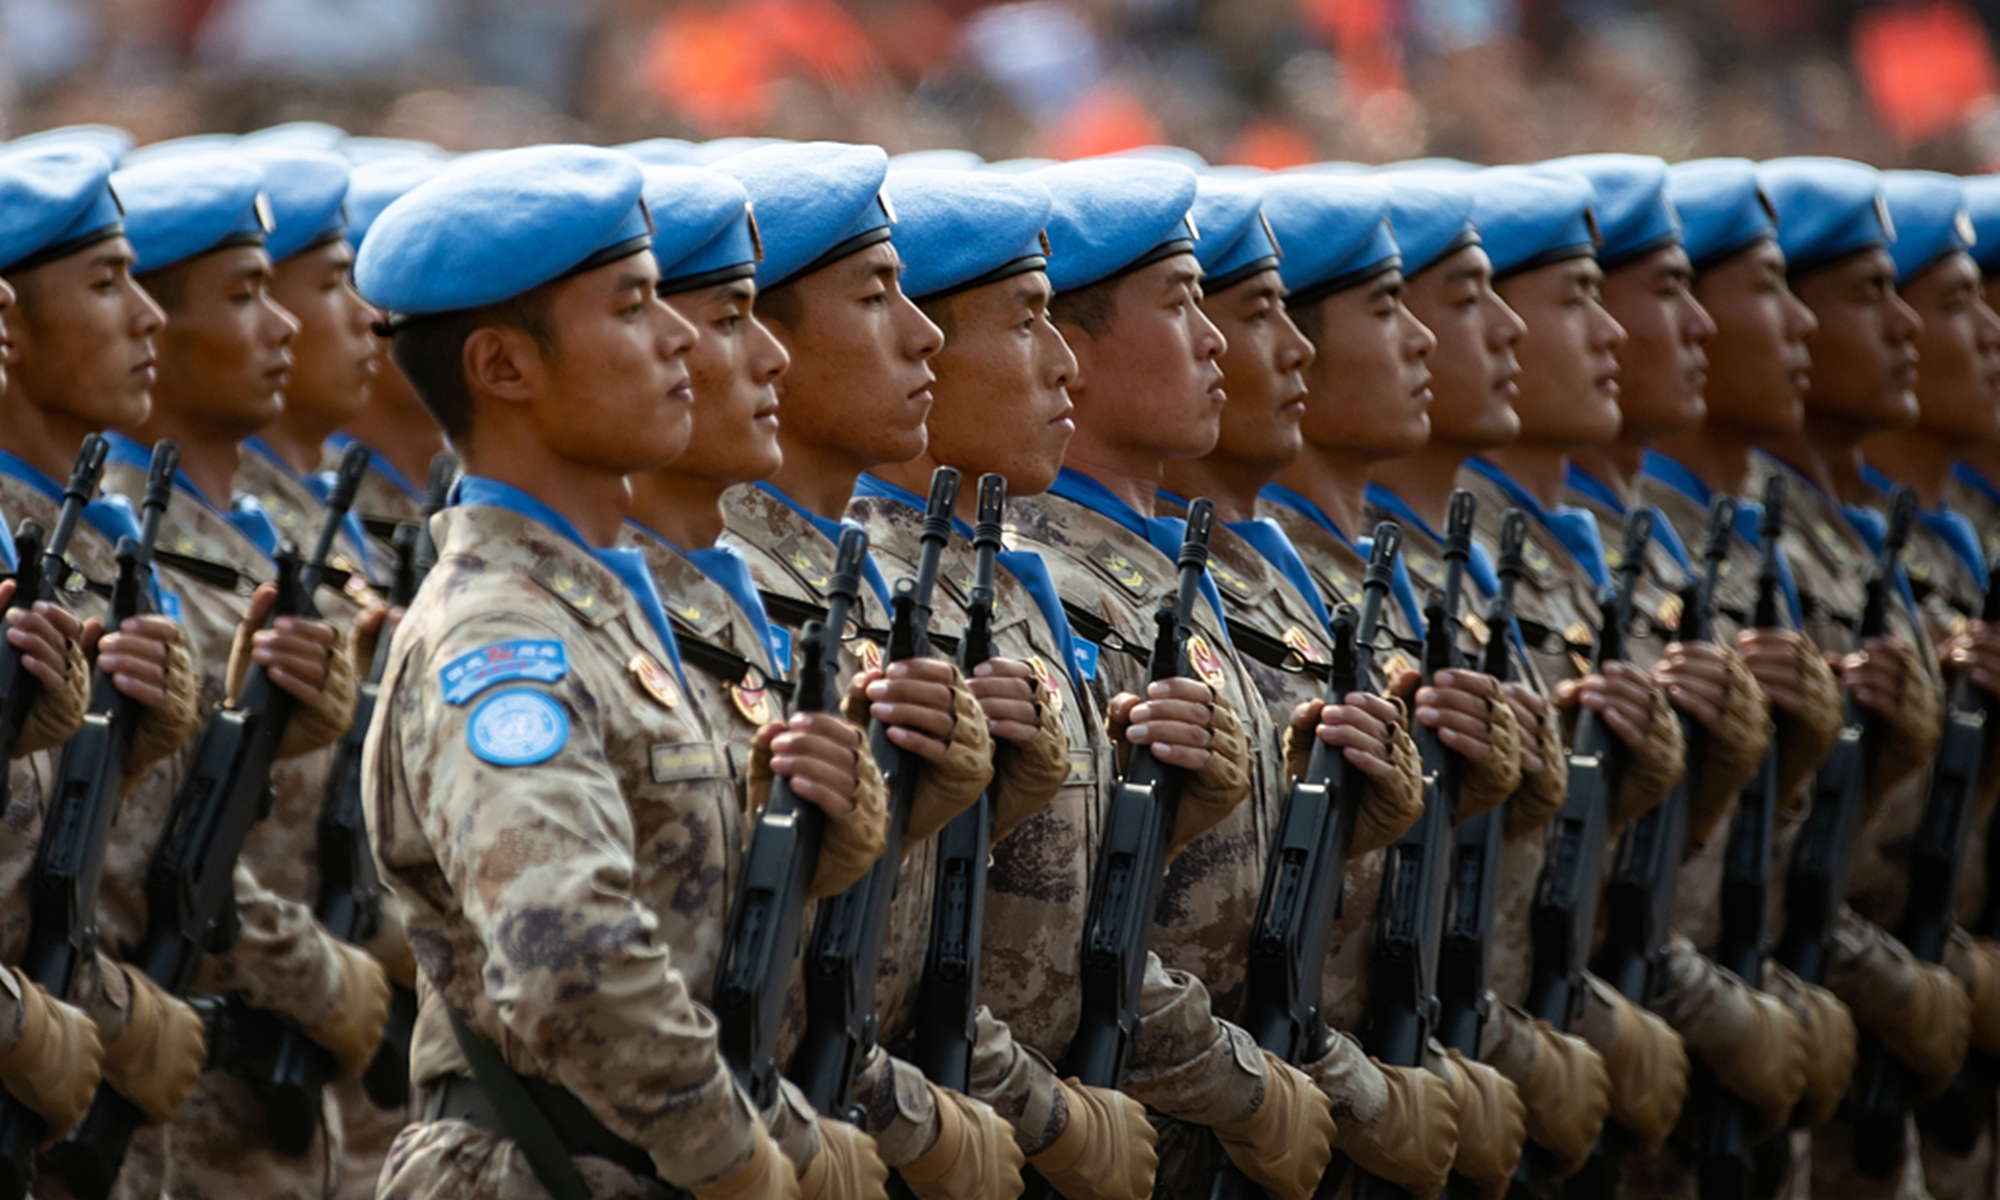 China's peacekeeping police become mainstay in UN operations - Global Times